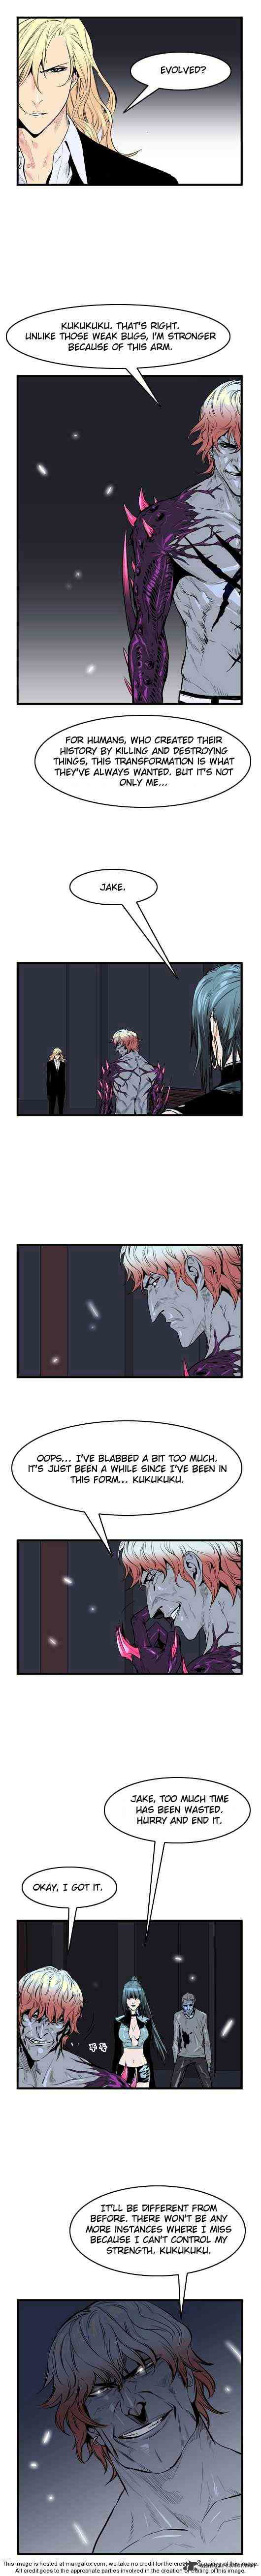 Noblesse Chapter 46 _ Chapters 46-60 page 5